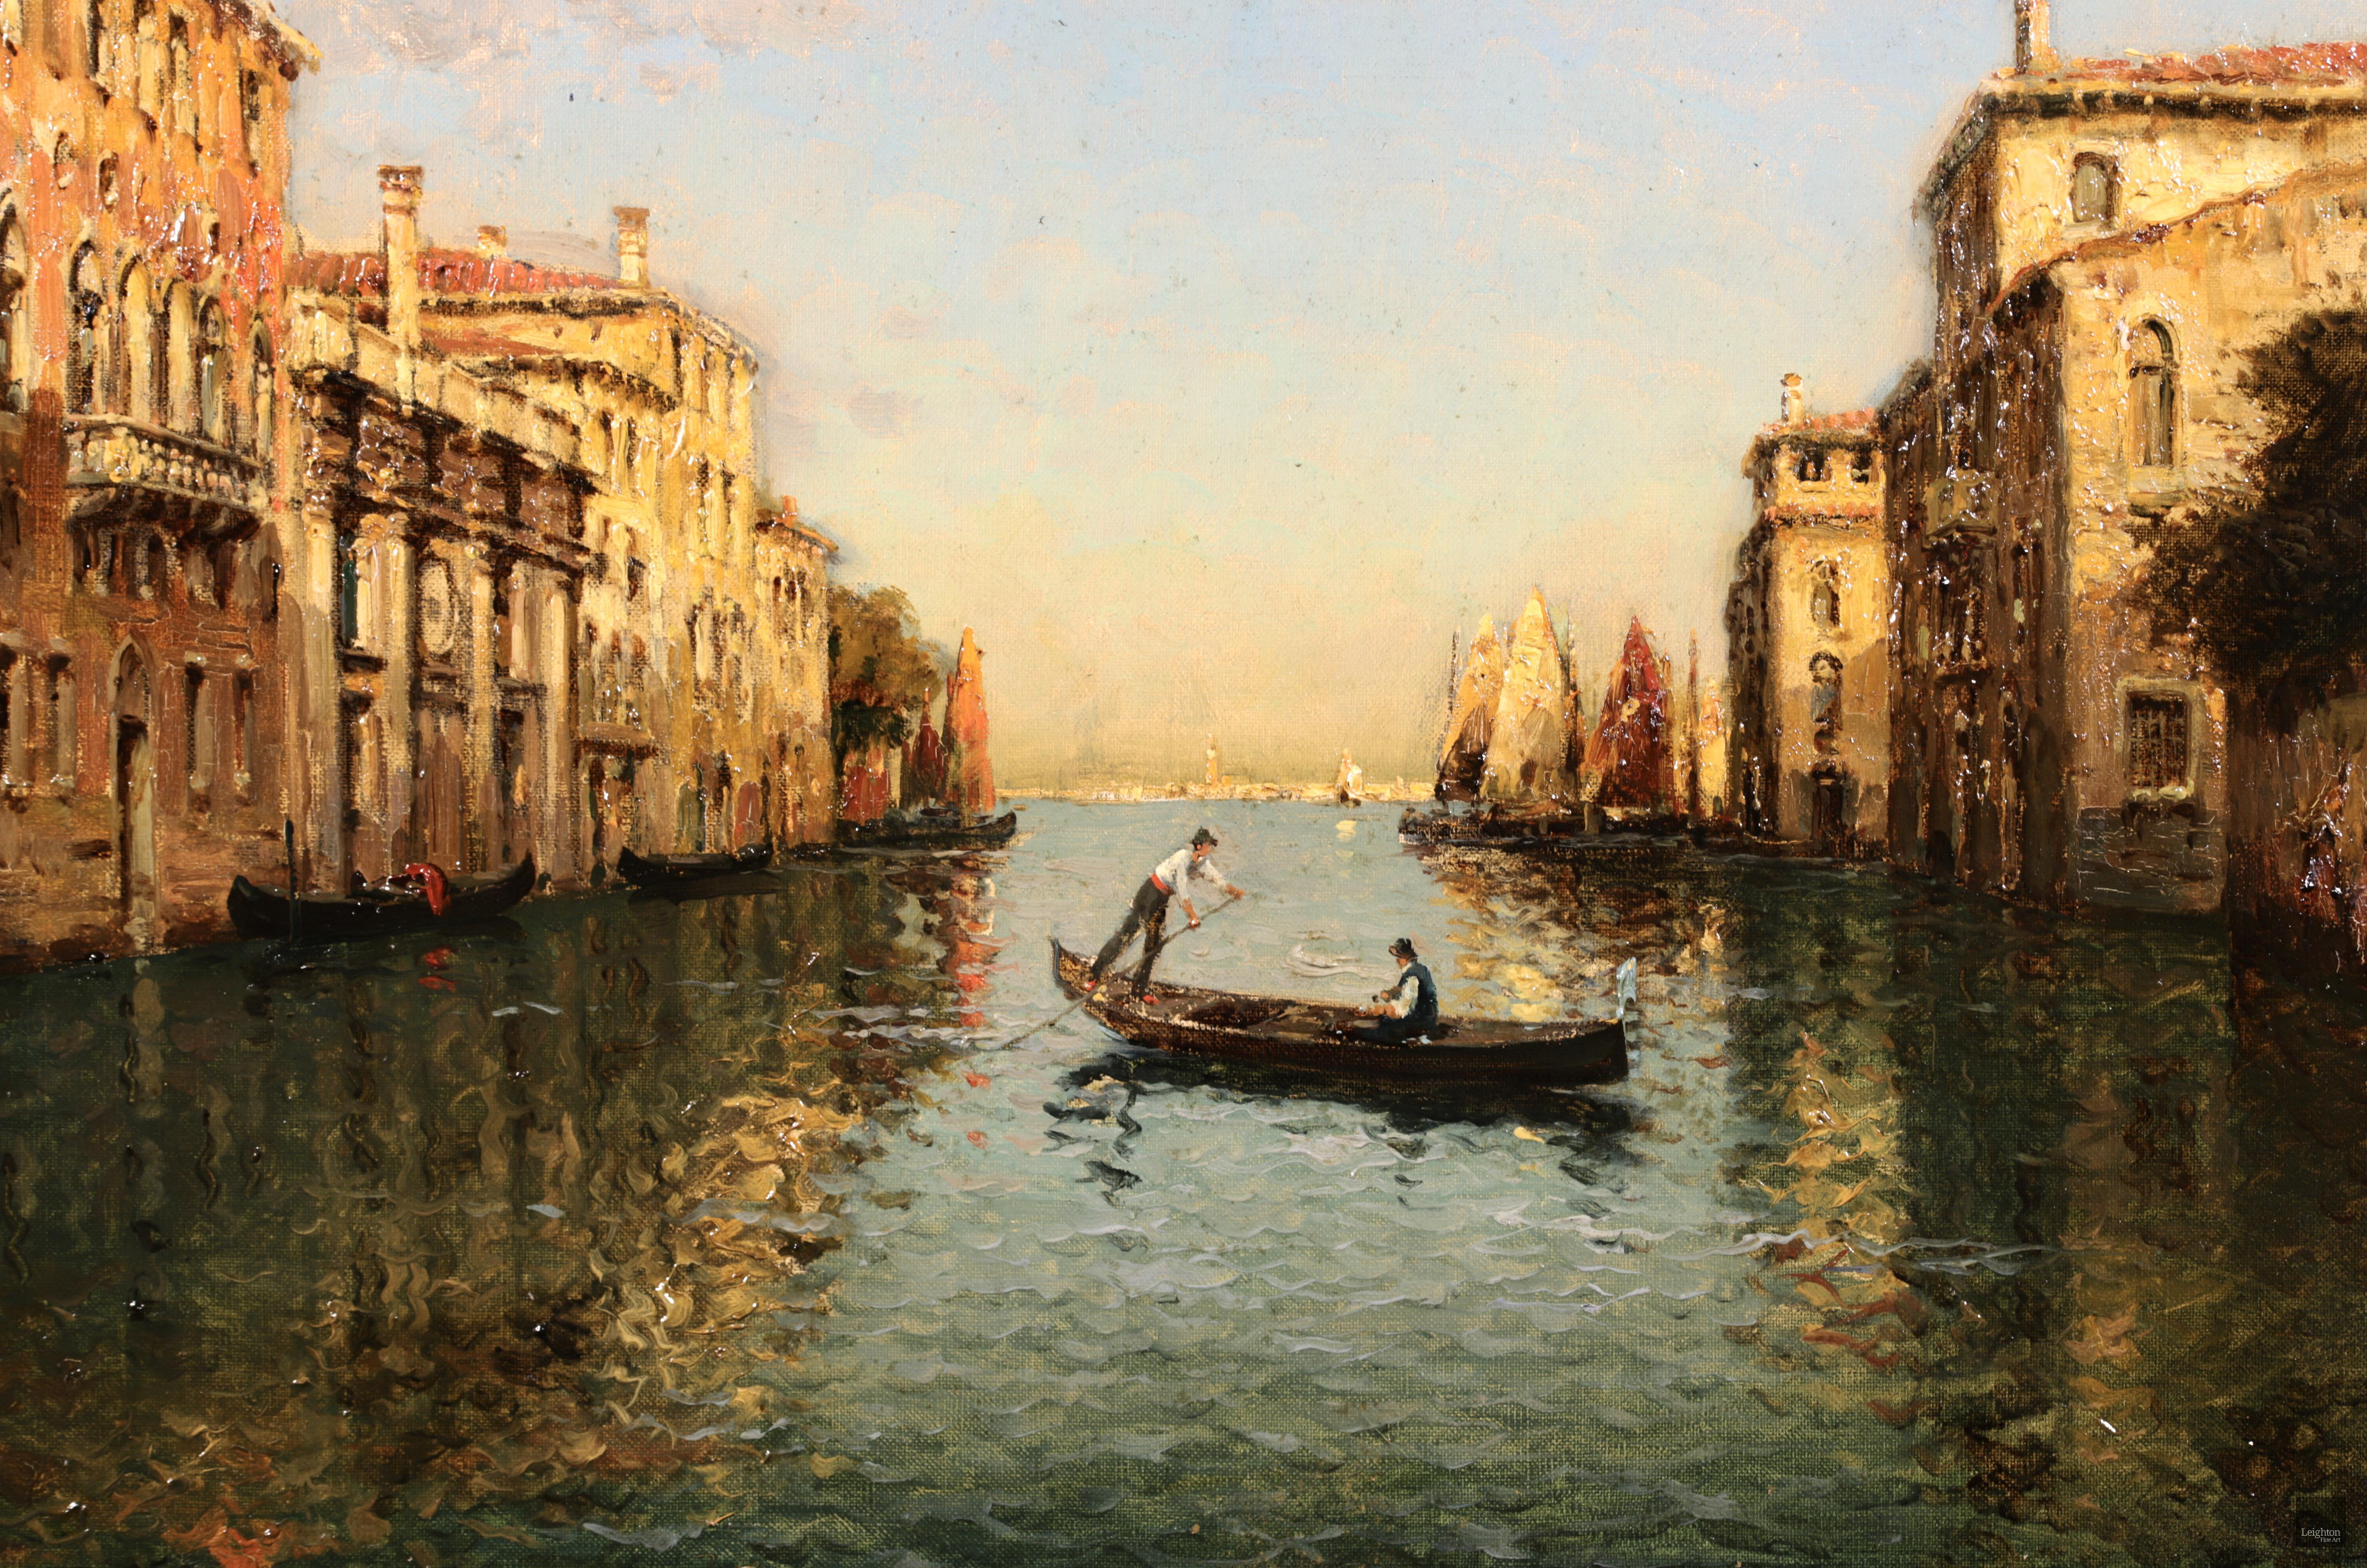 Gondoliers on a canal - Venice - Impressionist Oil, Landscape by Antoine Bouvard 2